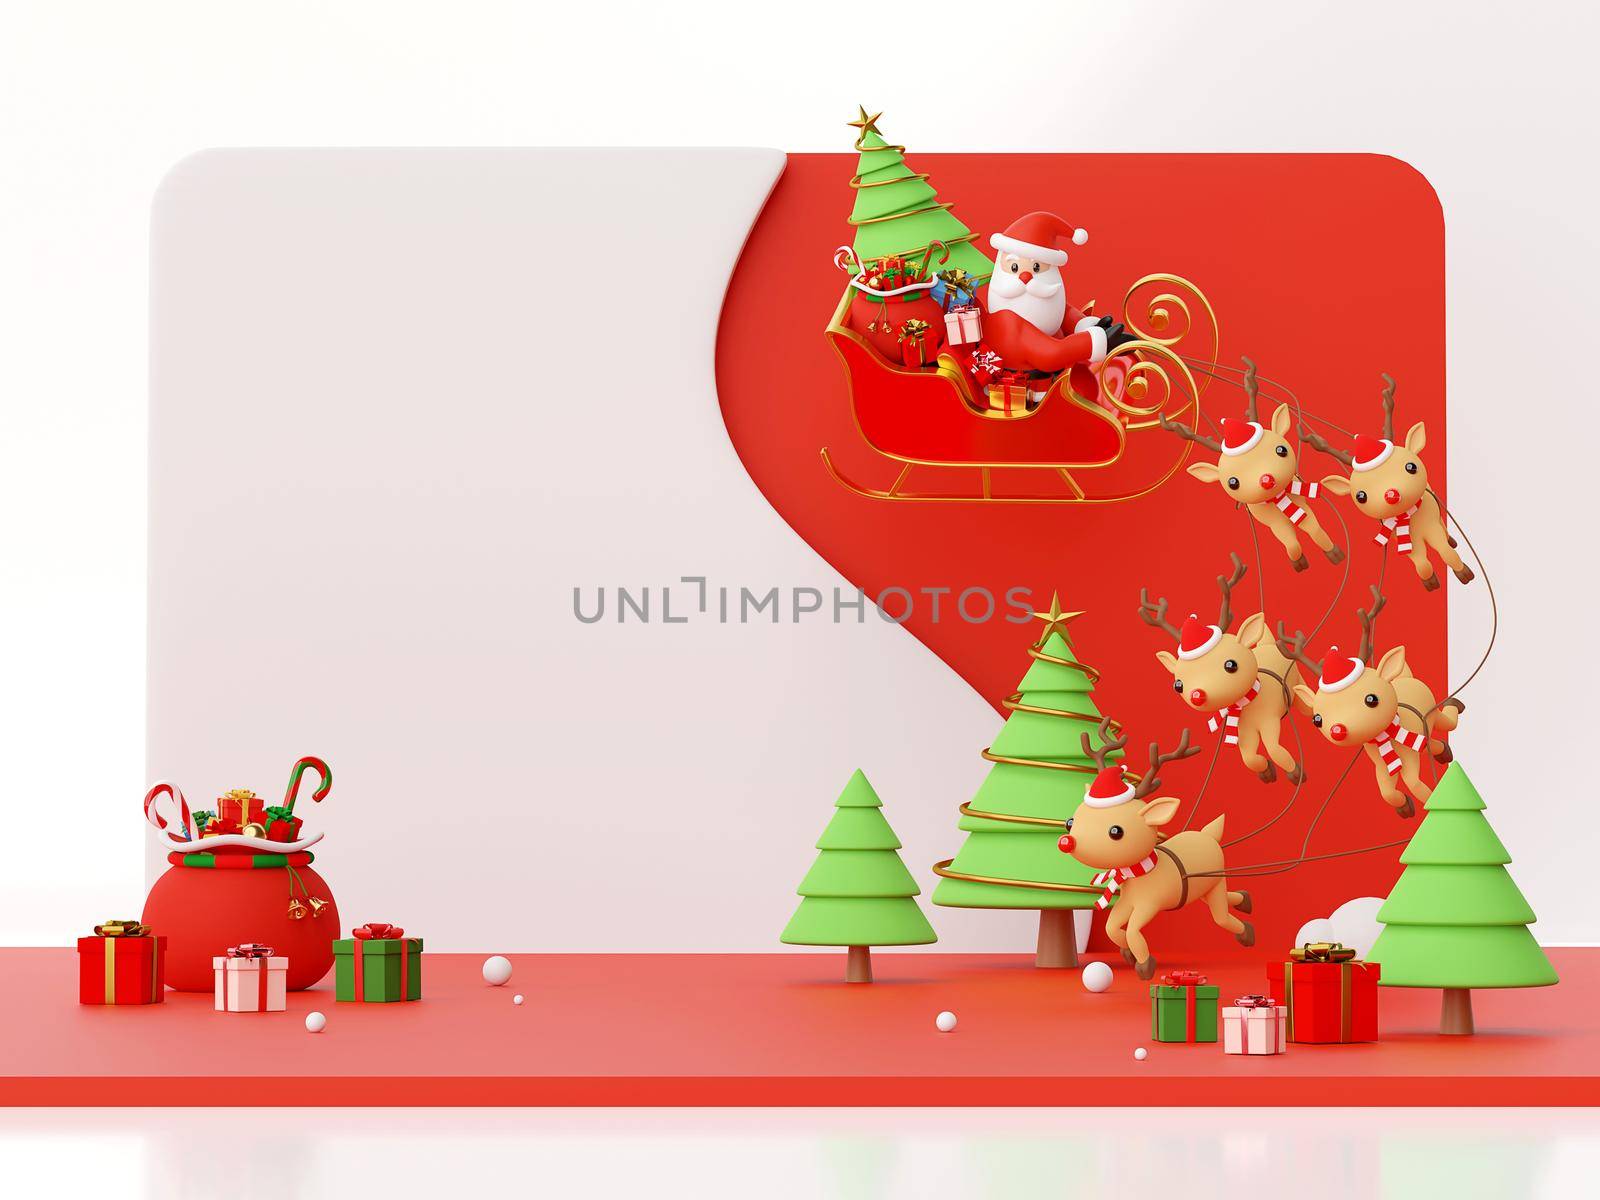 Scene of Santa Claus on a sleigh full of Christmas gifts and pulled by reindeer, 3d rendering by nutzchotwarut